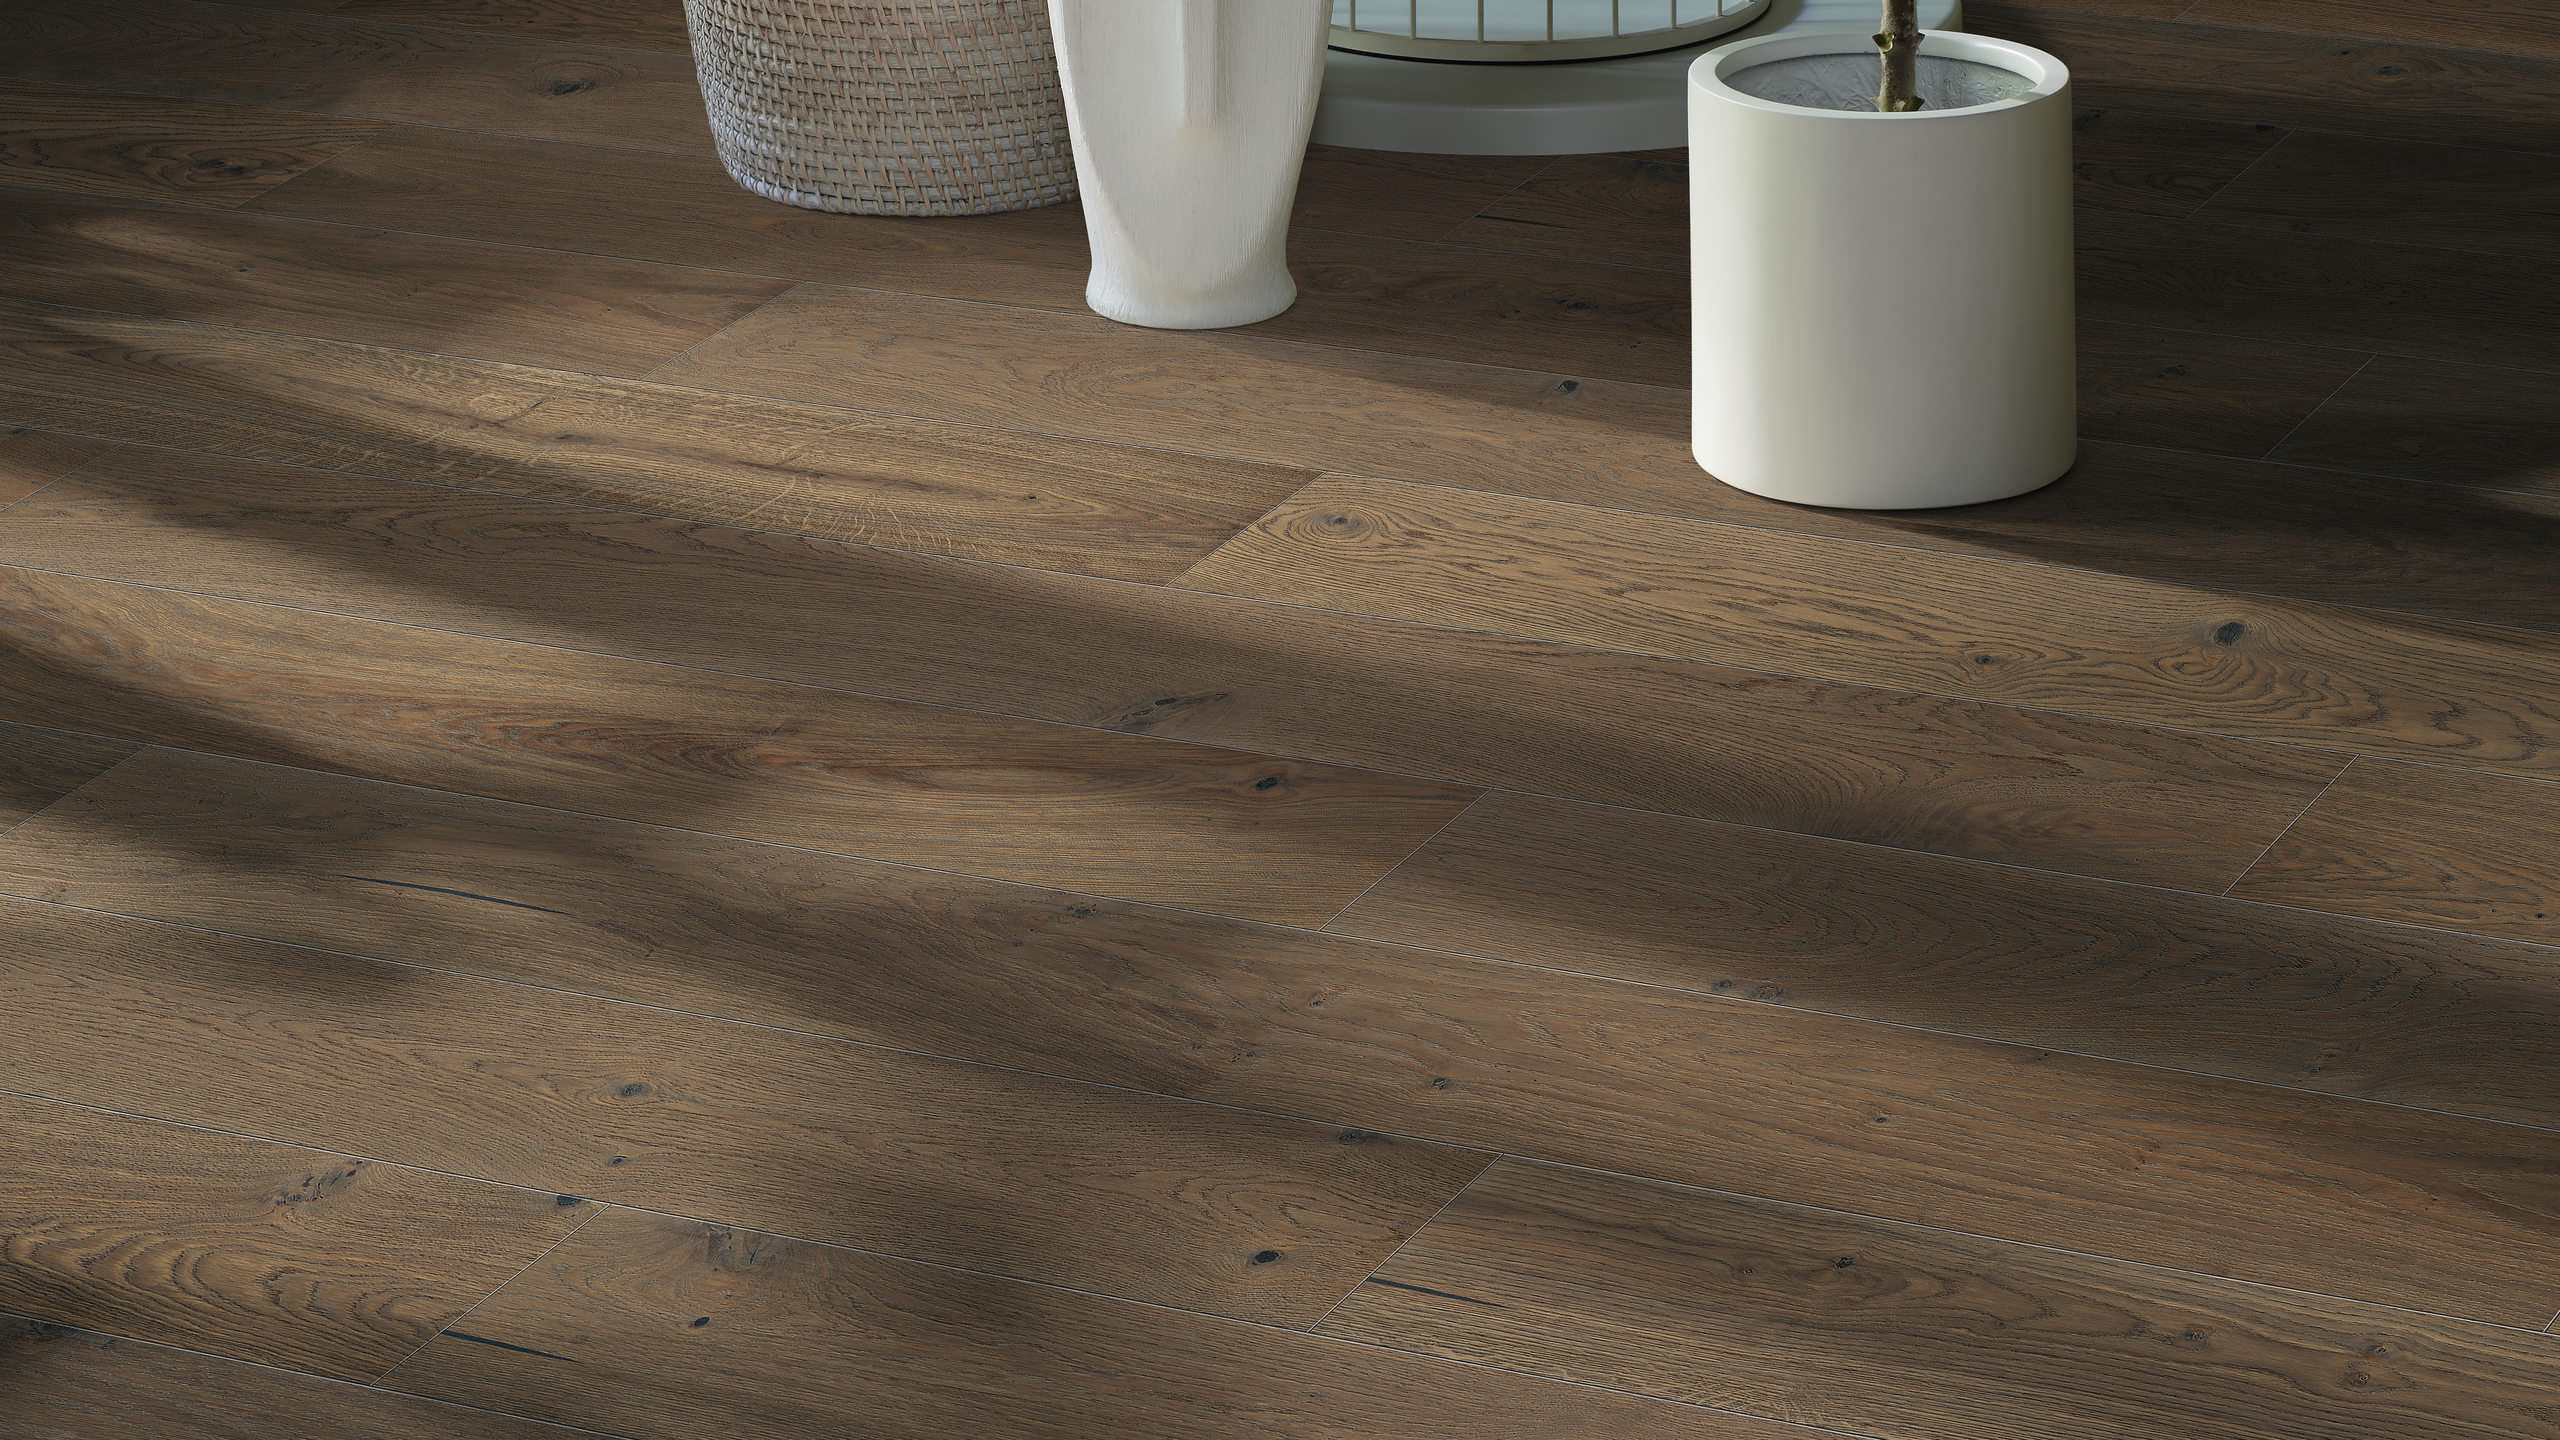 HARO PARQUET 4000 Plank 1-Strip 180 4V Oak Sand Grey Sauvage brushed naturaLin plus Top Connect